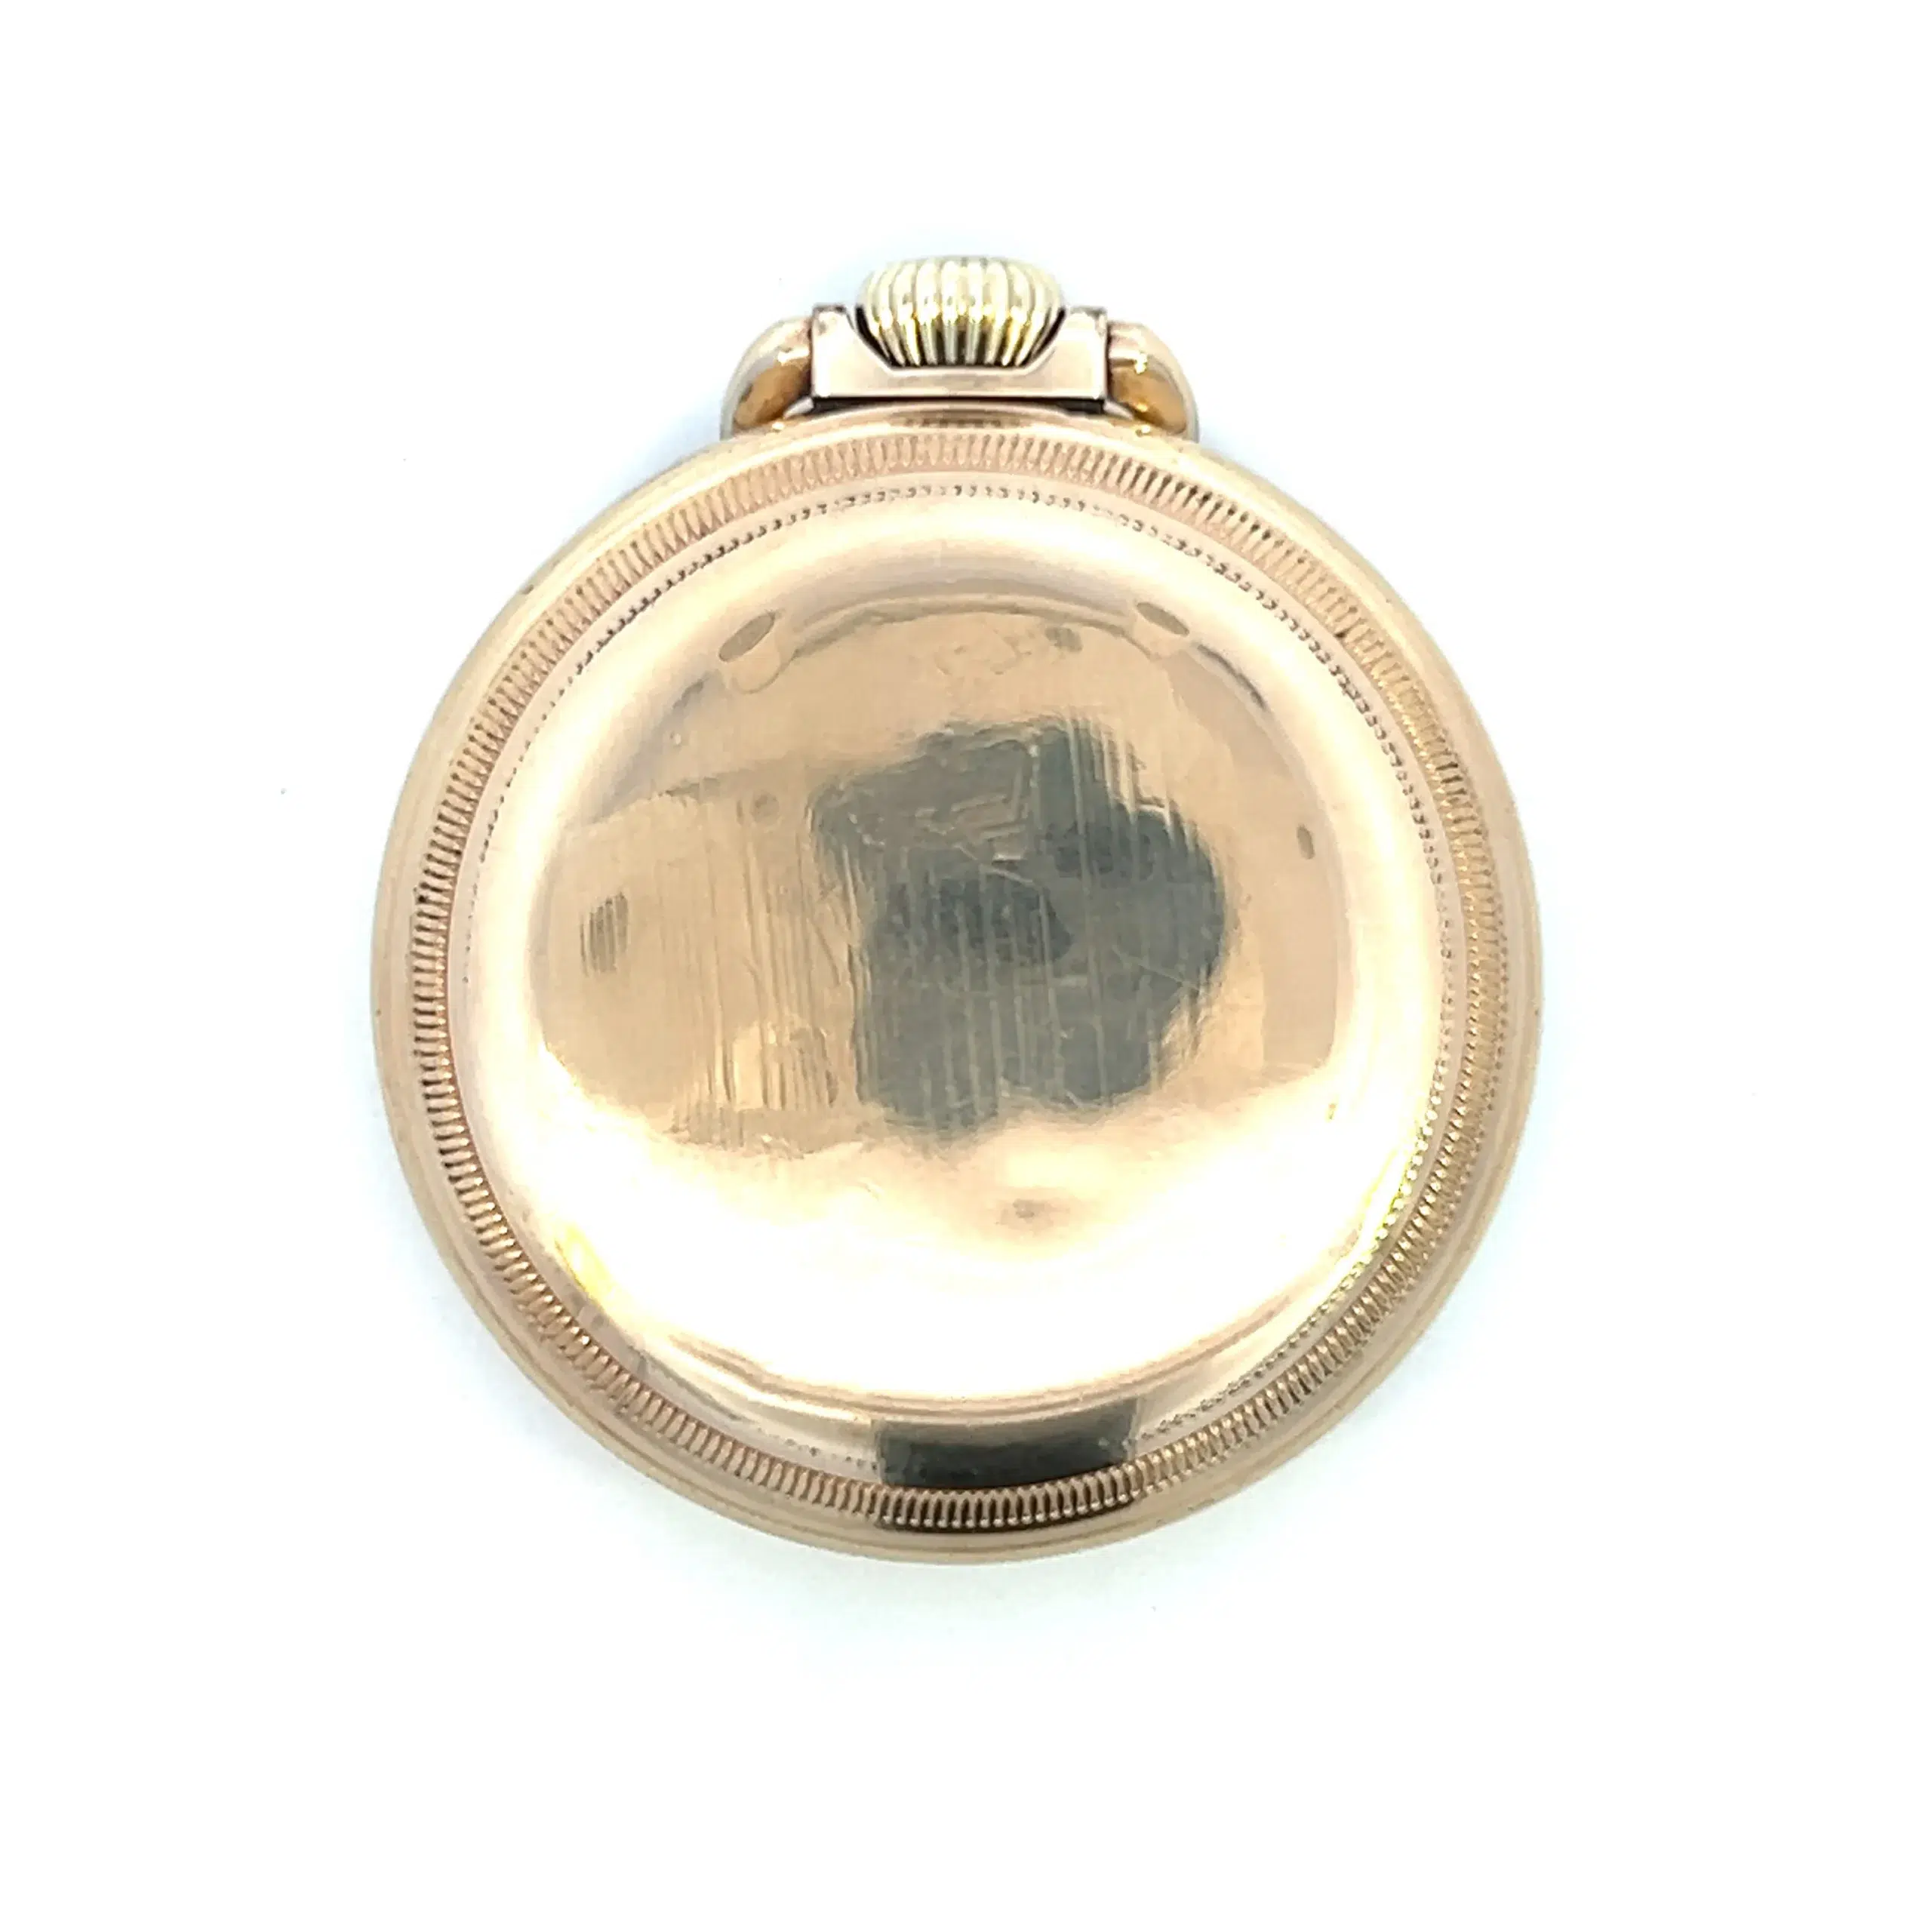 One estate vintage Waltham Premier Railroad Pocket Watch with an open-face design with a 16mm round gold-filled case, white dial, black Arabic numerals, and 21 jewel movement.